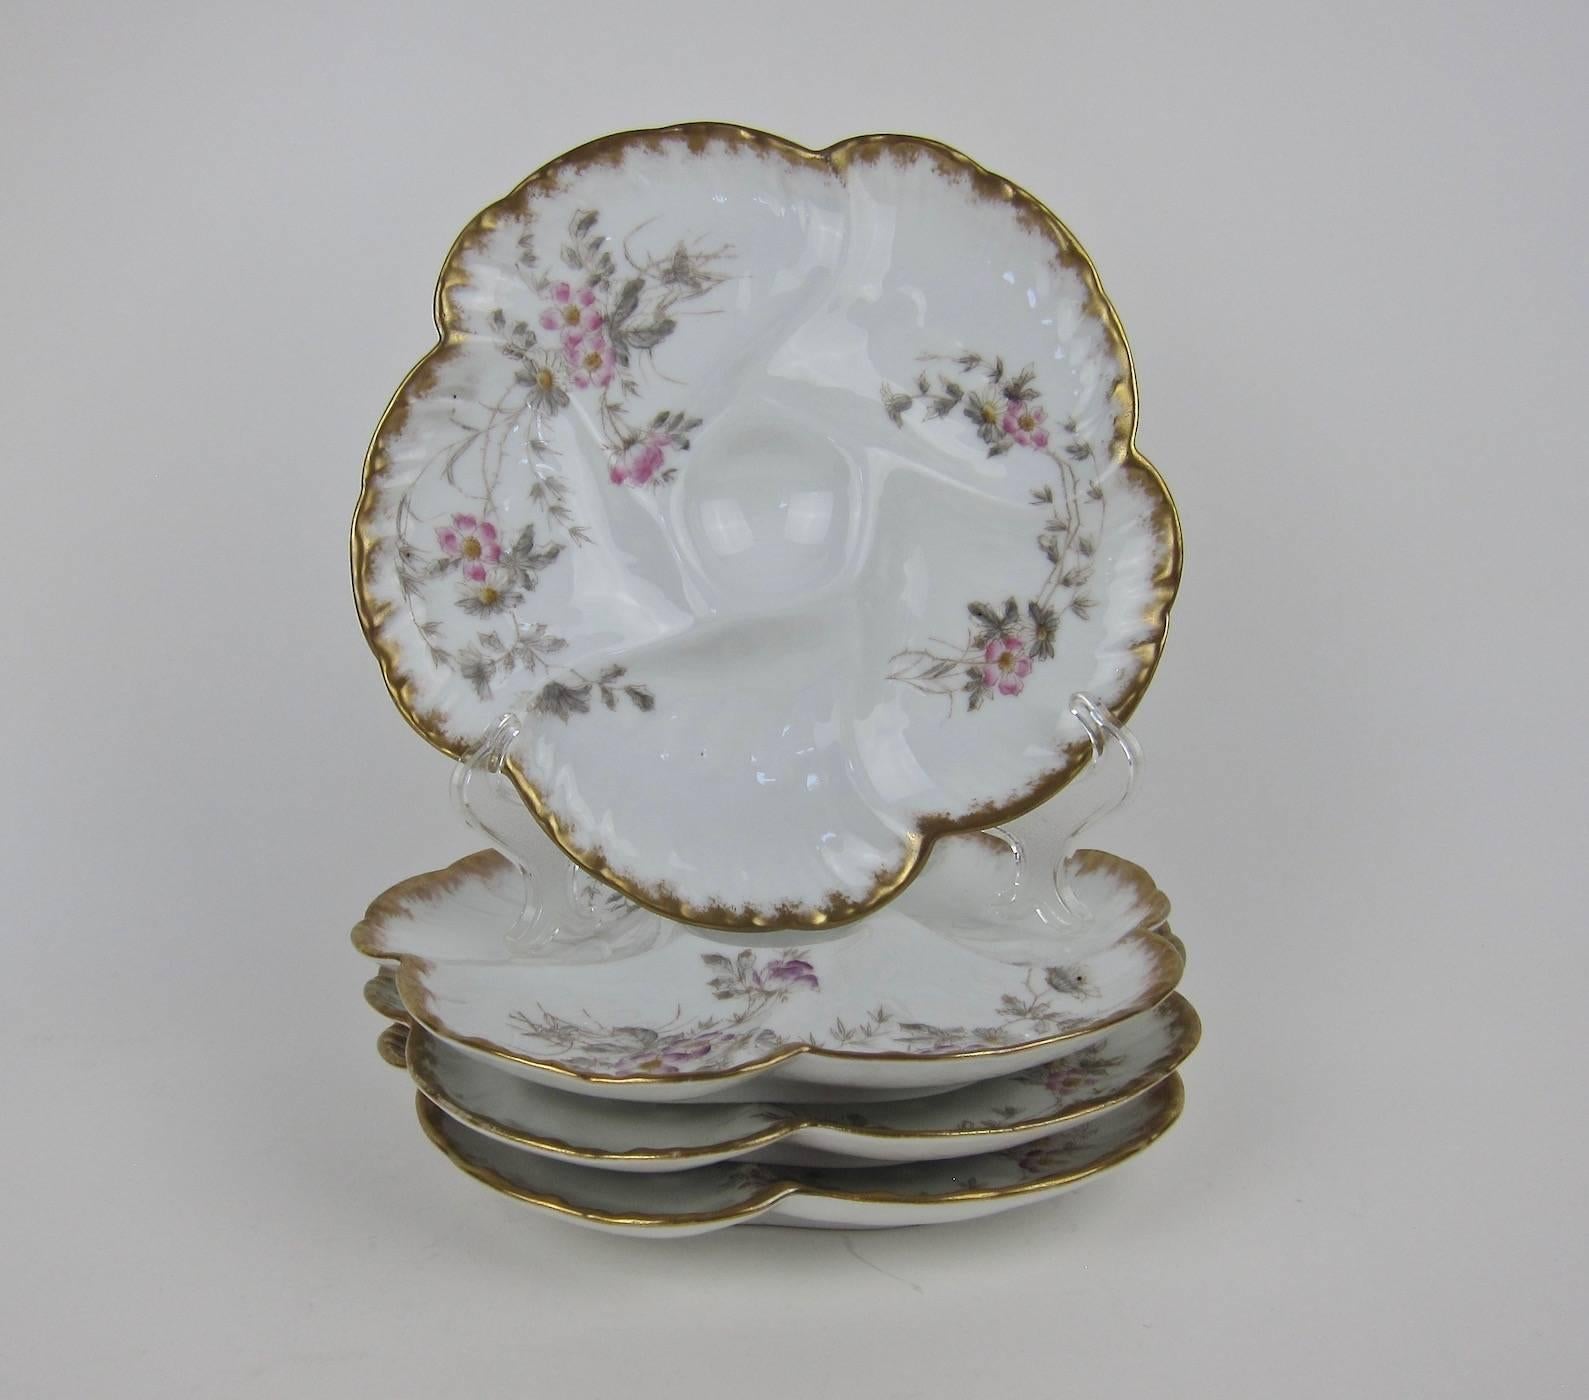 A set of four antique French porcelain oyster plates from Société Gérard, Dufraisseix and Morel (formerly Charles Field Haviland) of Limoges, France. The molded 'Wave' pattern plates have five wells for oysters over ice surrounding a smaller,